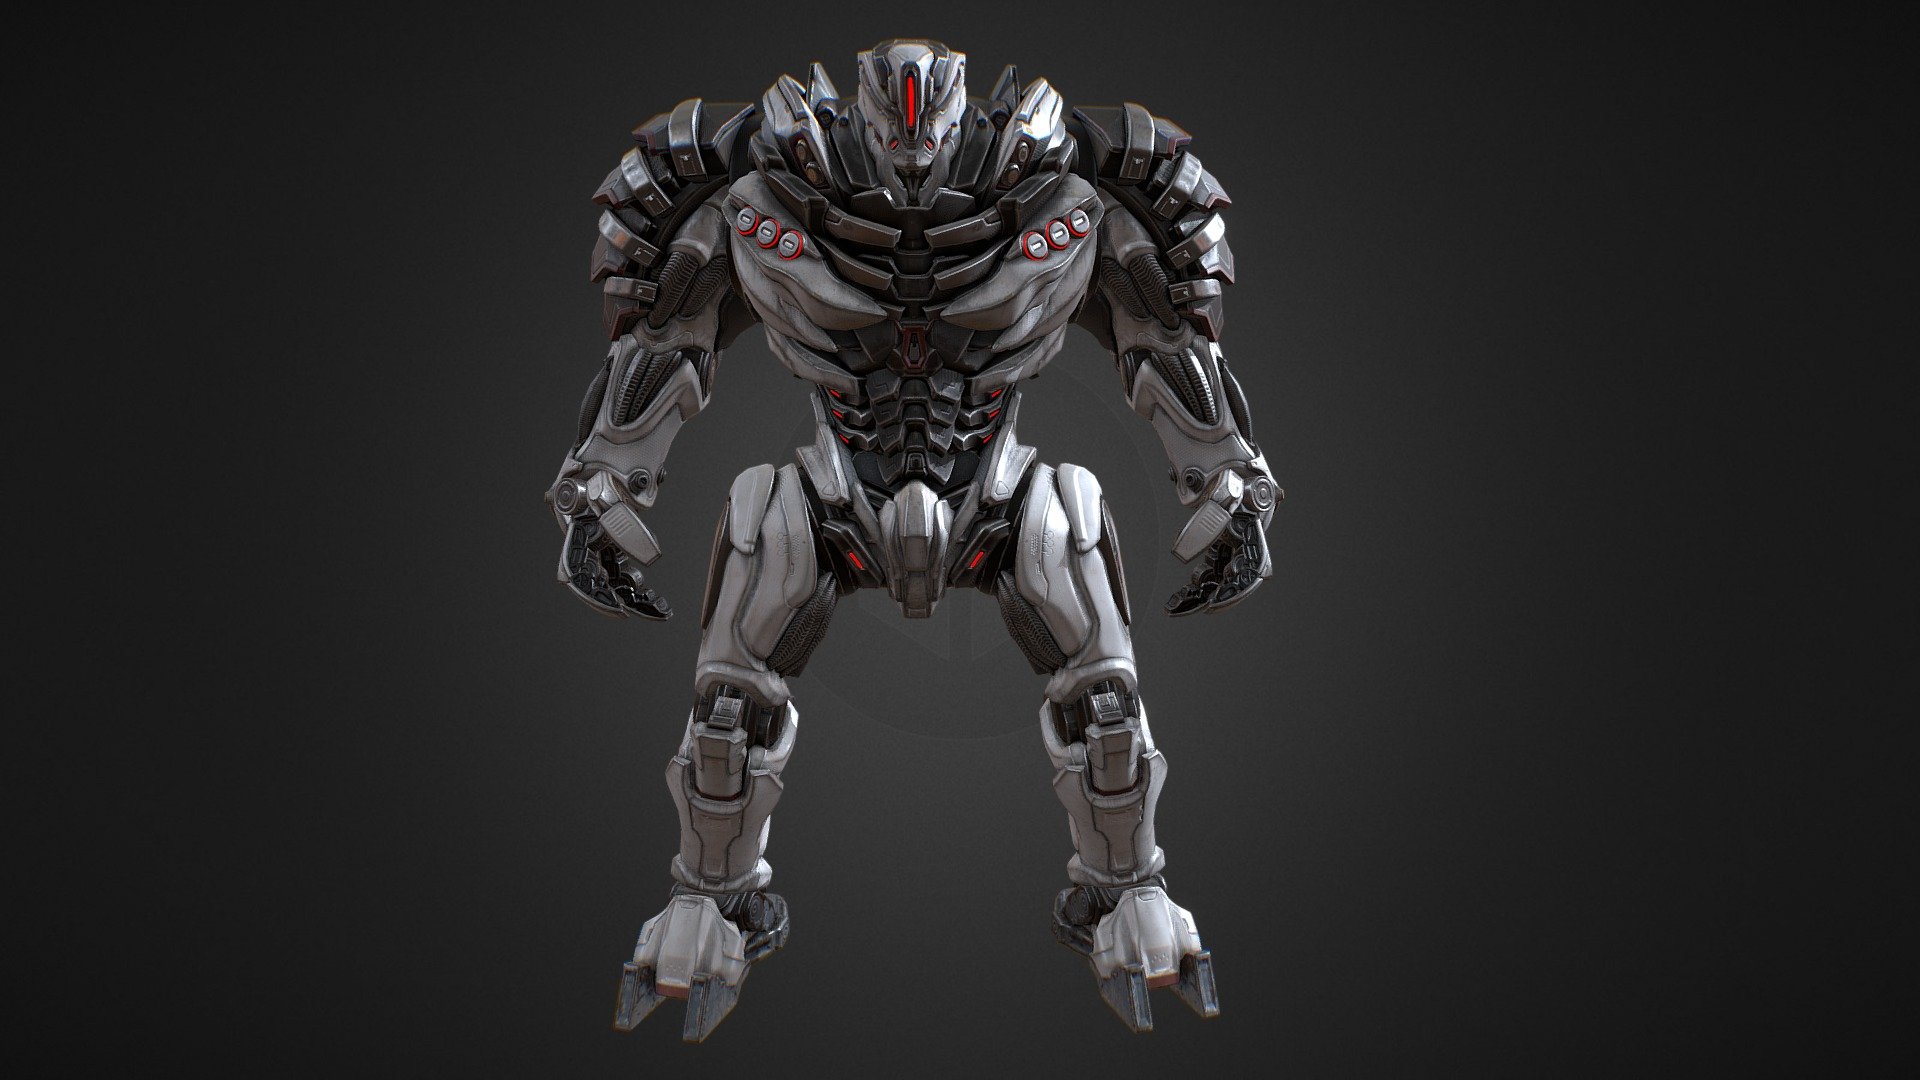 HUMNX AI and simulated modeling centered around local maxima designs, with all predicted outcomes favoring only slight changes to established mech configurations. But the USFF discovery of Line Bonded Molecular Structure, swiftly stolen, provided new direction, ultimately leading to the development of the most powerful HUMNX mech, the HX Behemoth.

HP  450
Max Speed   128 Mph
Weight  200 Tons
Weapon (Left)   Thrasher AMG Machinegun Mk II, SlamshotHeavy Rocket
Weapon (Right)  Thrasher AMG Machinegun Mk II, Brimstone Cannon

https://archangelgame.com/mech/humnx-heavy - Humnx Behemoth - 3D model by Archangel: Hellfire (@archangelgame) 3d model